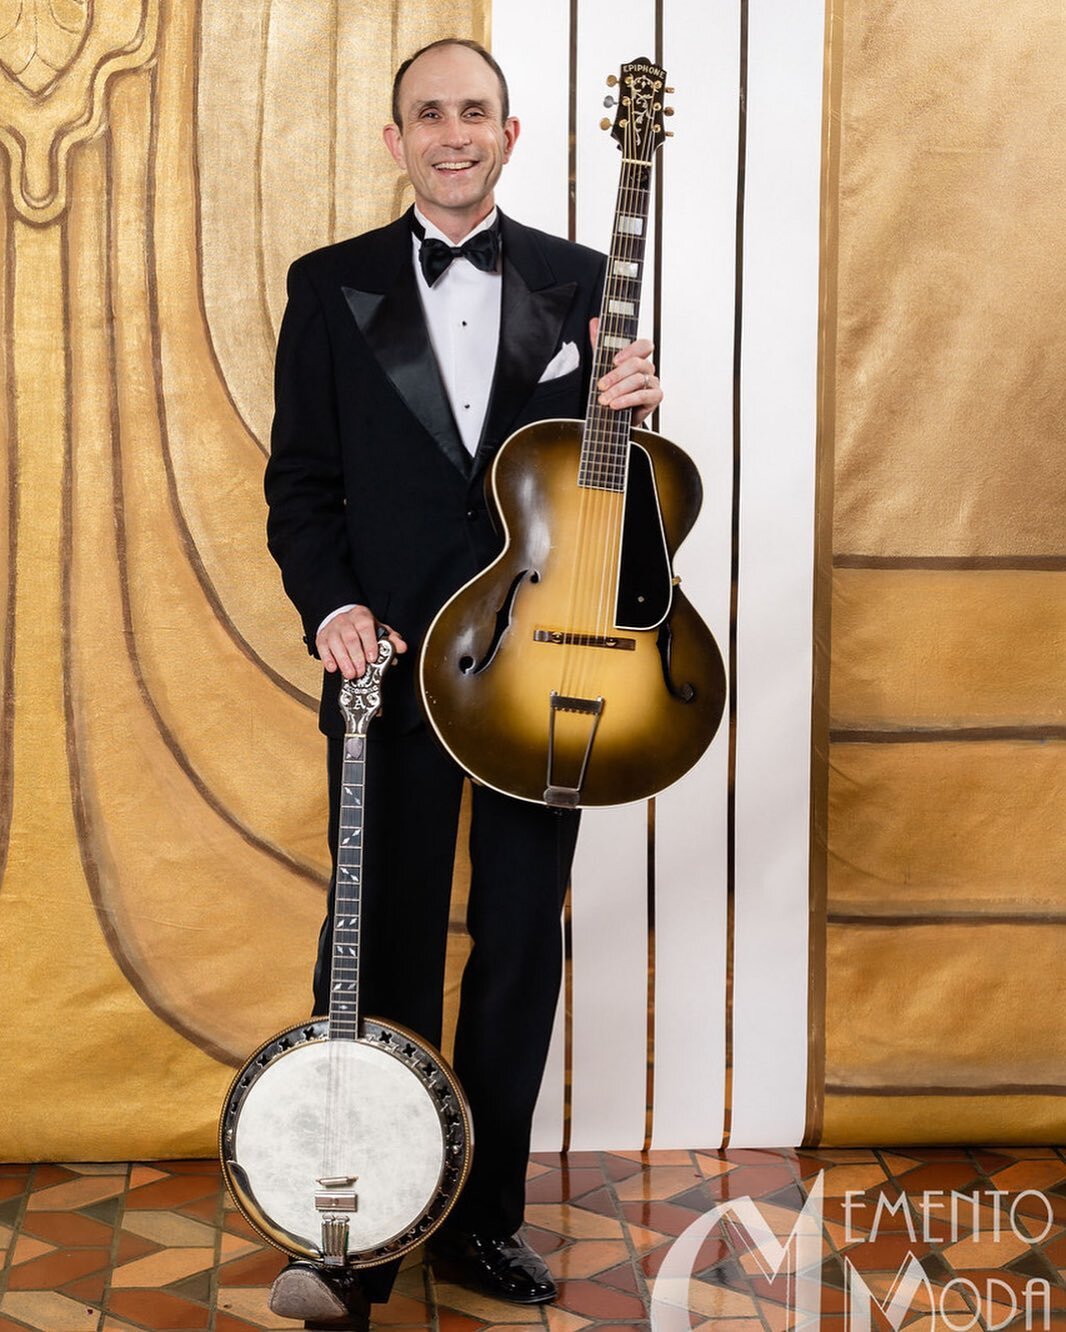 Thanks to @mementomoda_ for the glamour shot taken at this year&rsquo;s Art Deco Preservation Ball presented by the @artdecoca at the @oakparamount | early 1930s evening attire from @relicvintage | 1927 Epiphone Recording Model A banjo and 1934 Epiph